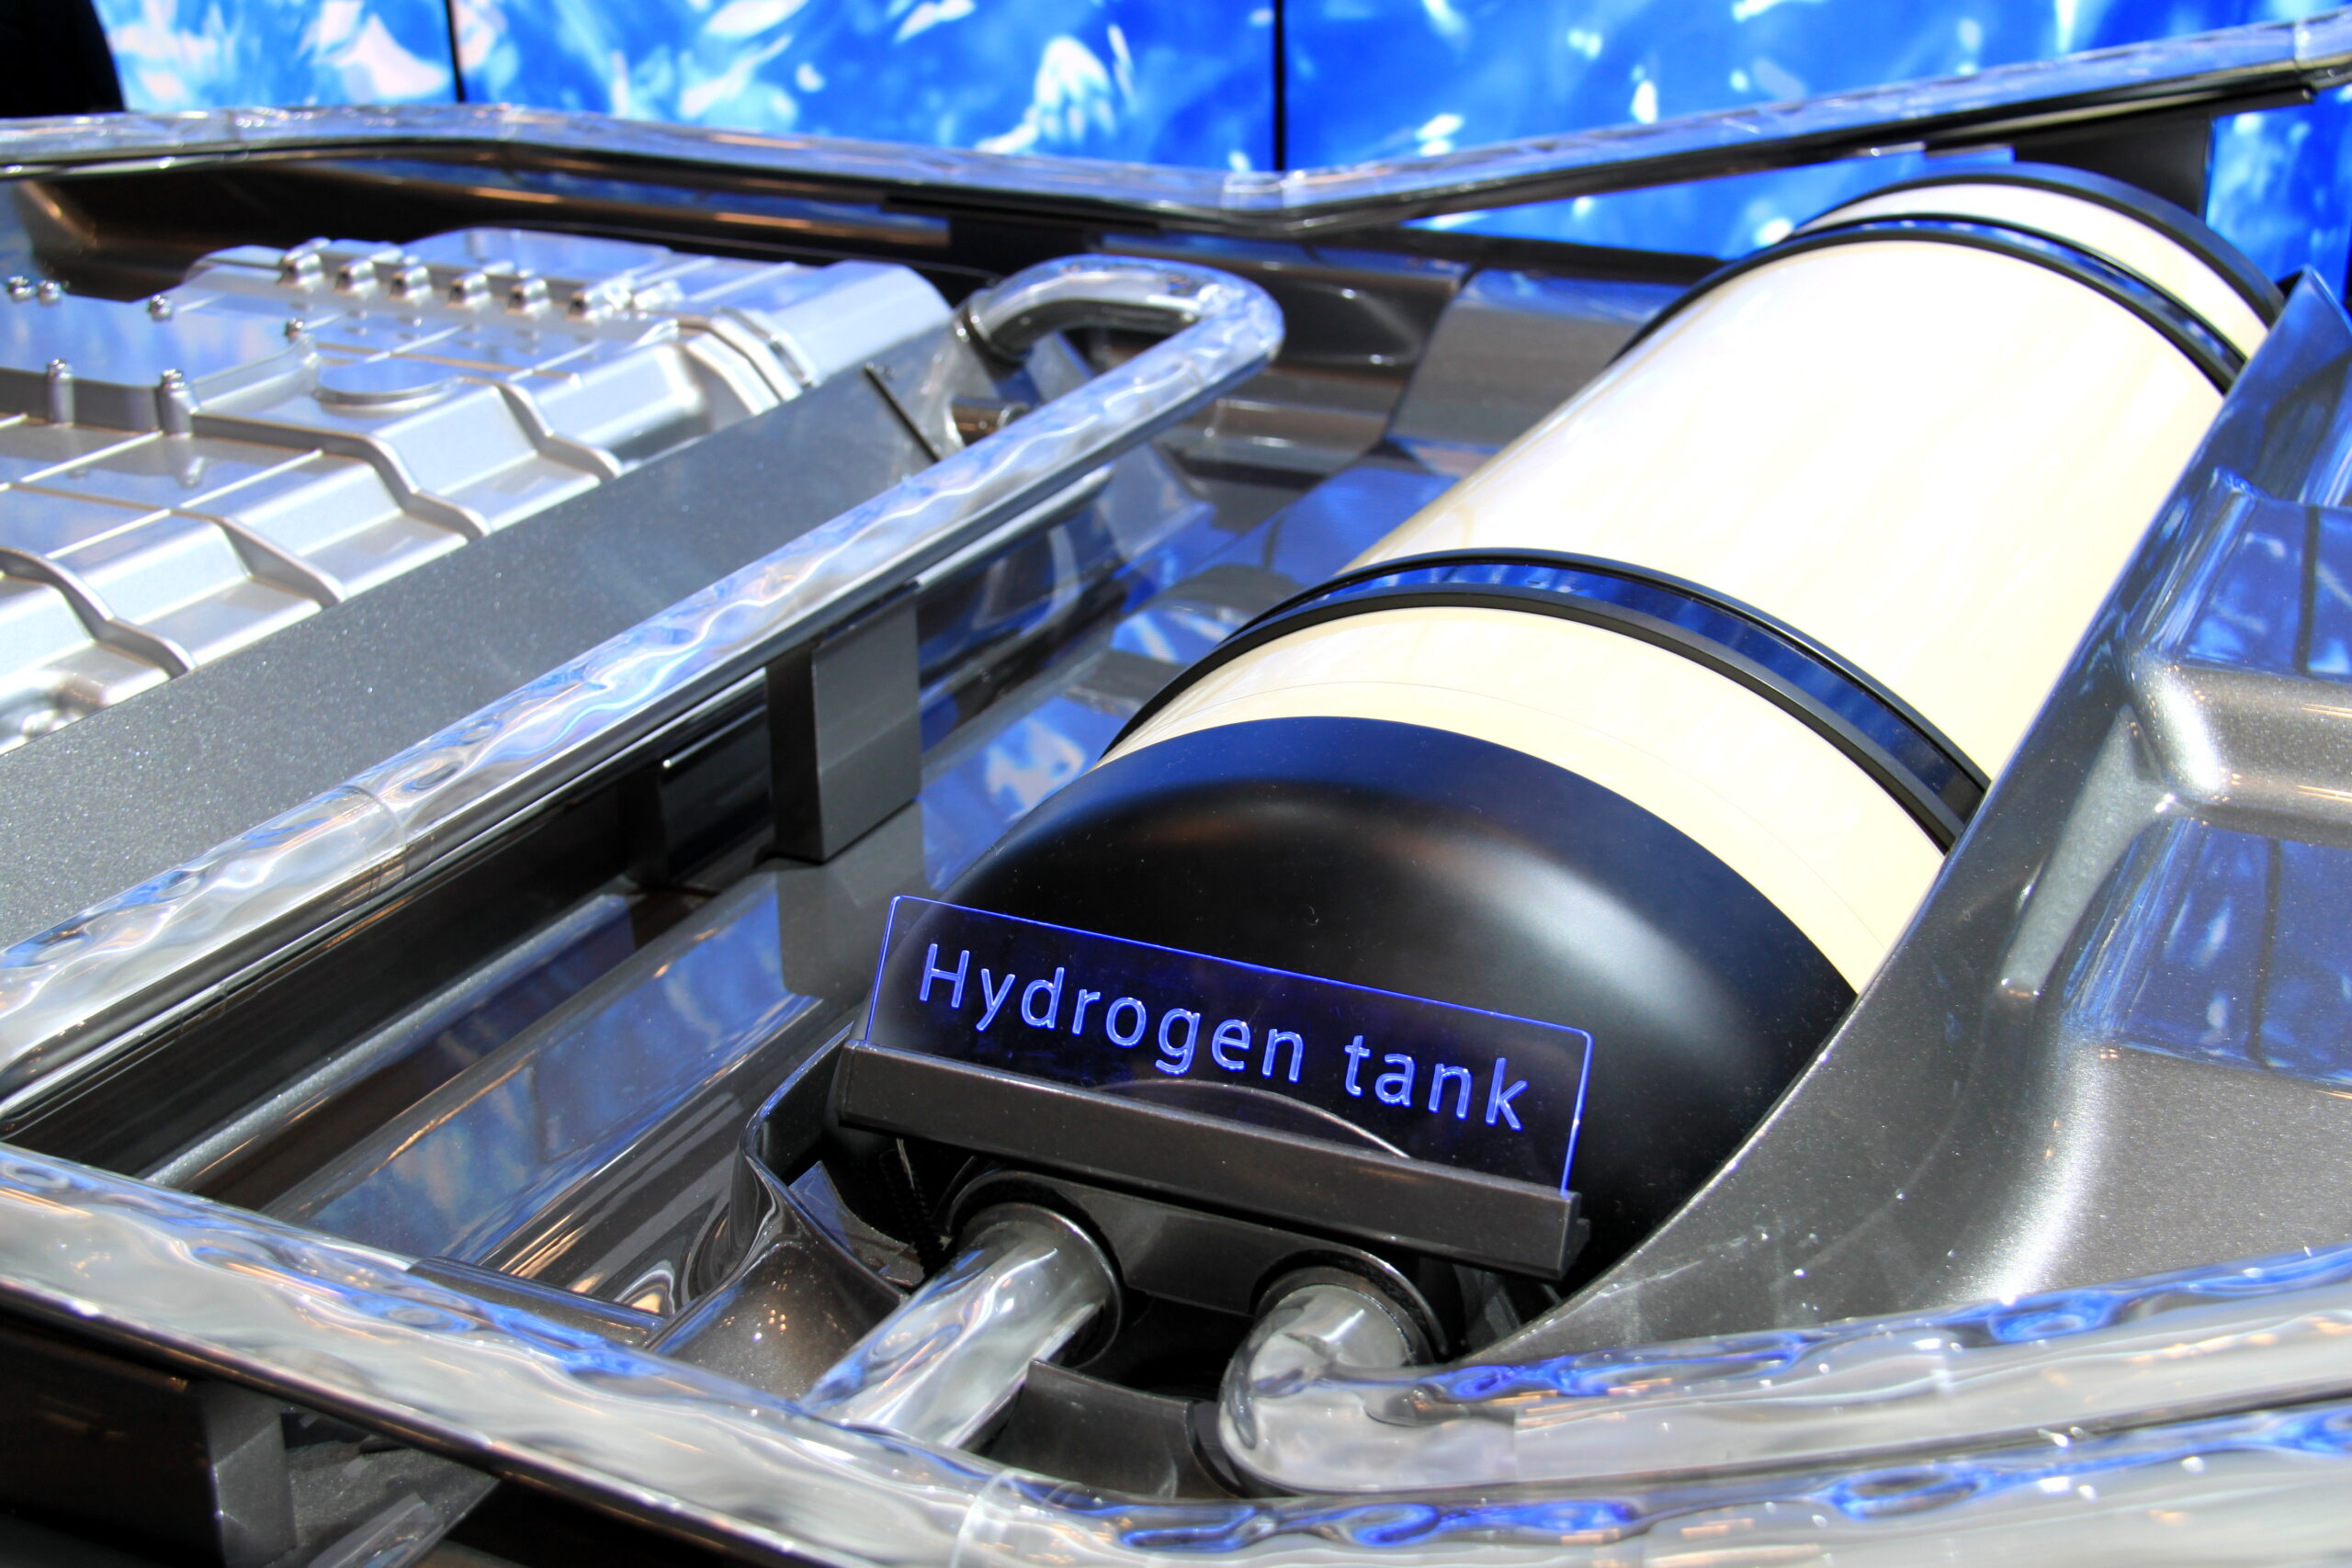 An early 2014 showcase from Toyota shows the potential seamlessness of incorporating hydrogen into personal vehicles and this reality is increasingly being actualized. Source: https://commons.wikimedia.org/wiki/File:Toyota_hydrogen_fuel_cell_at_the_2014_New_York_International_Auto_Show_(13956809802).jpg Joseph Brent, Wikimedia